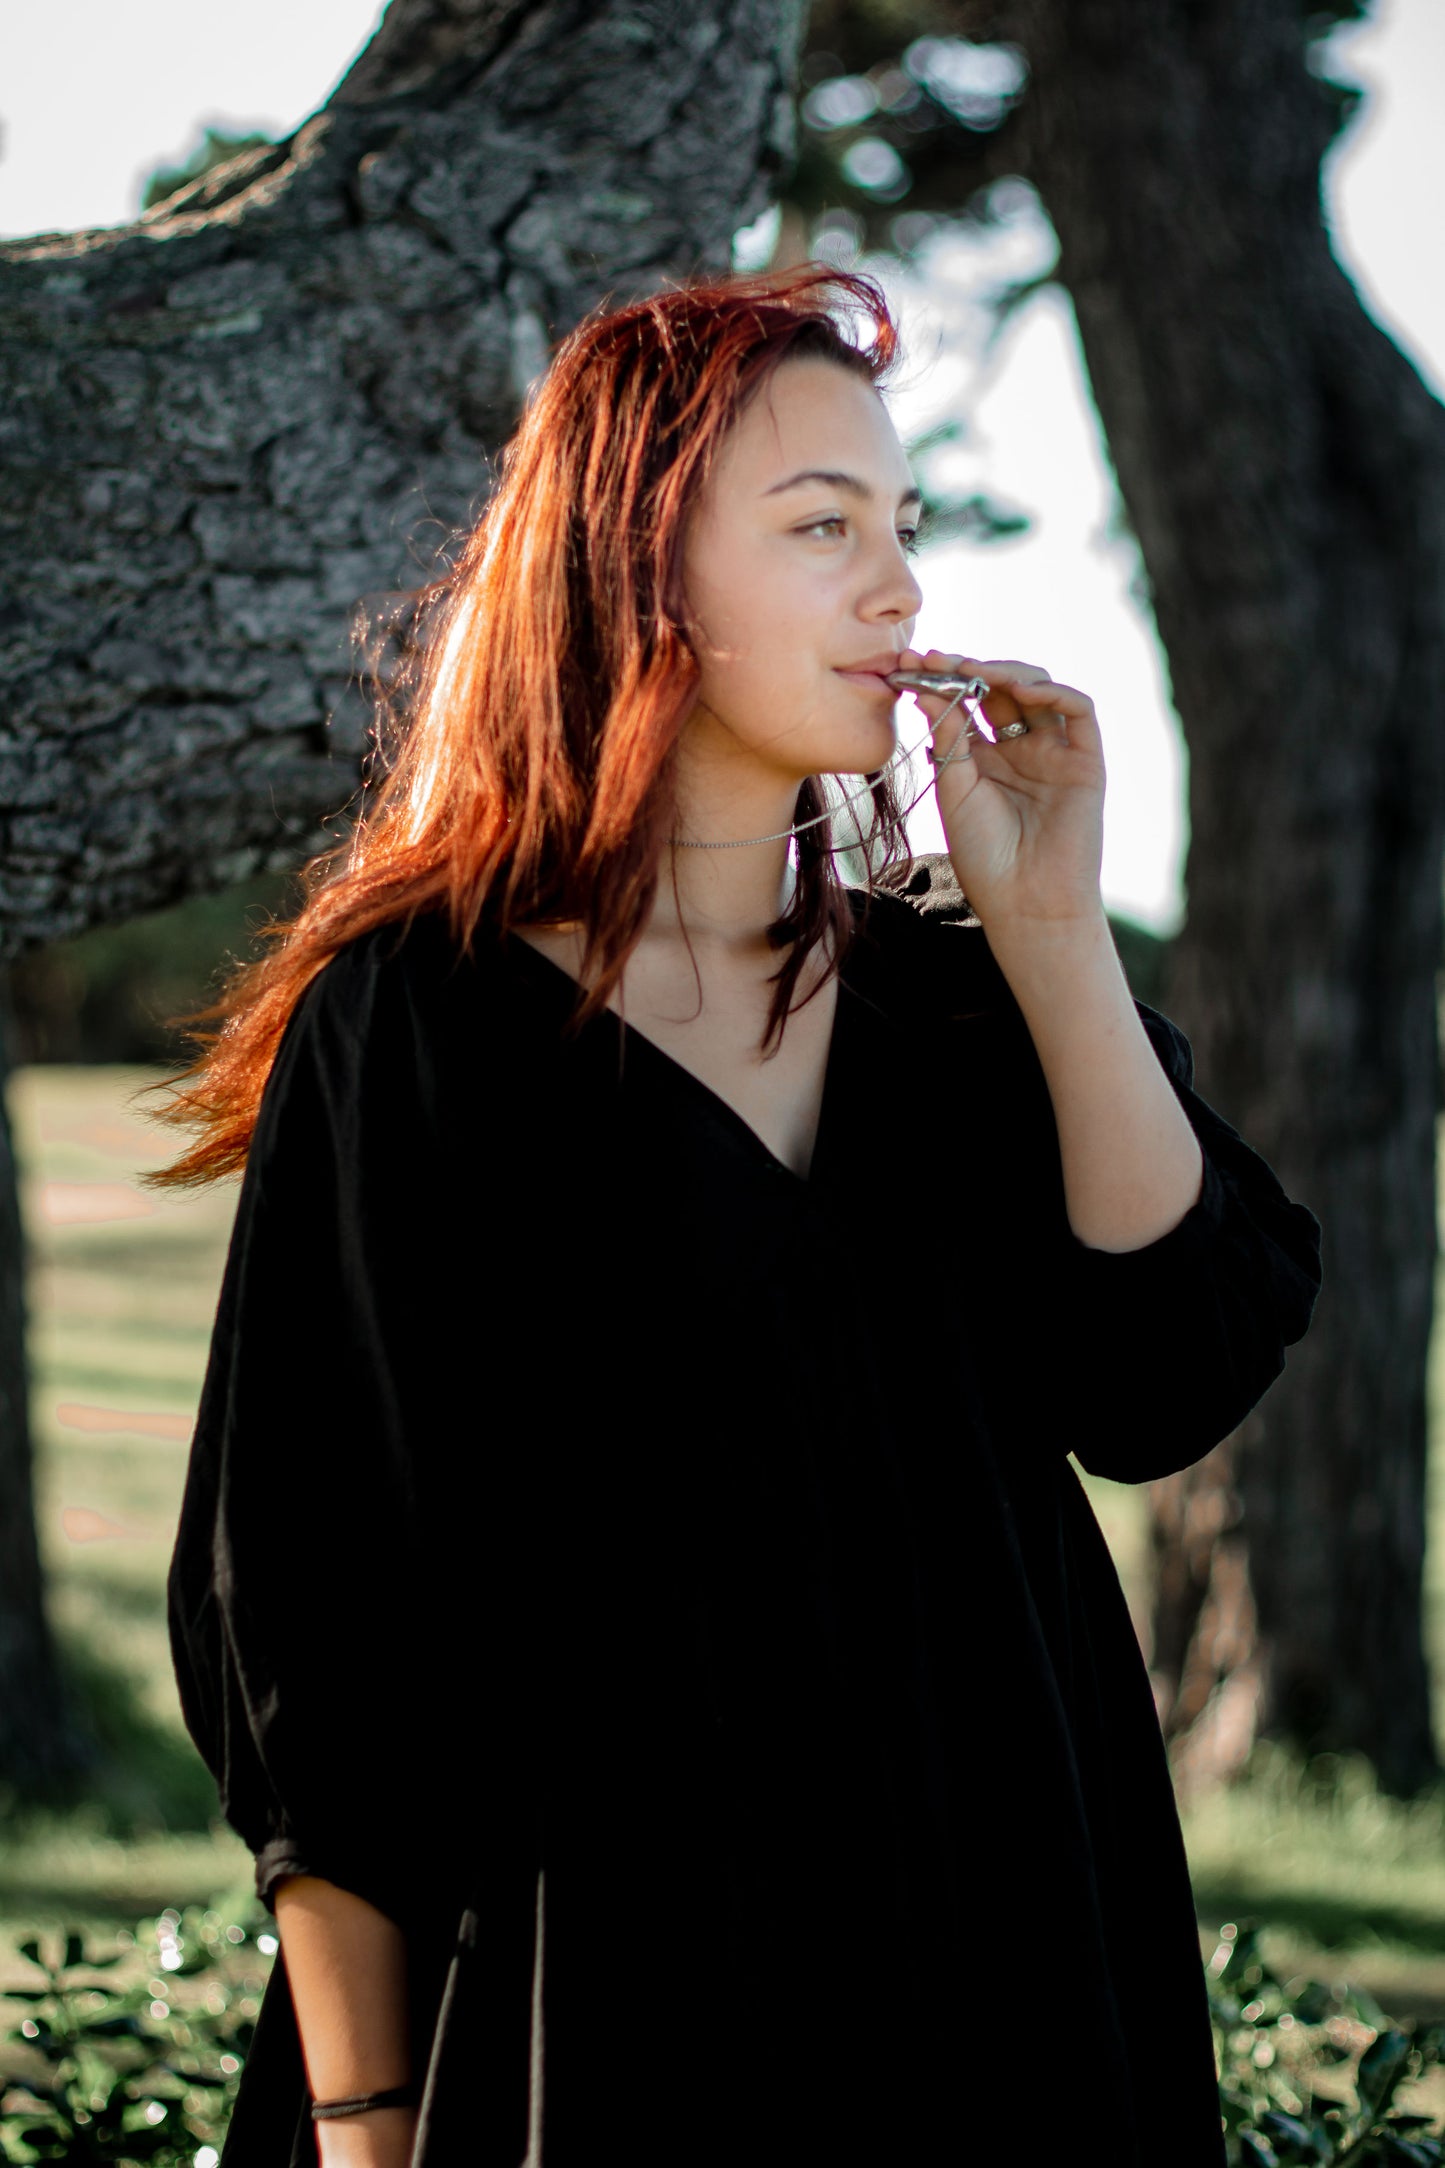 black loose dress nz, black dress nz, nz fashion, breathing tool, anxiety necklace, anxiety whistle, stress relief, nz beach, red hair, youth nz, hauroa, wellbeing nz